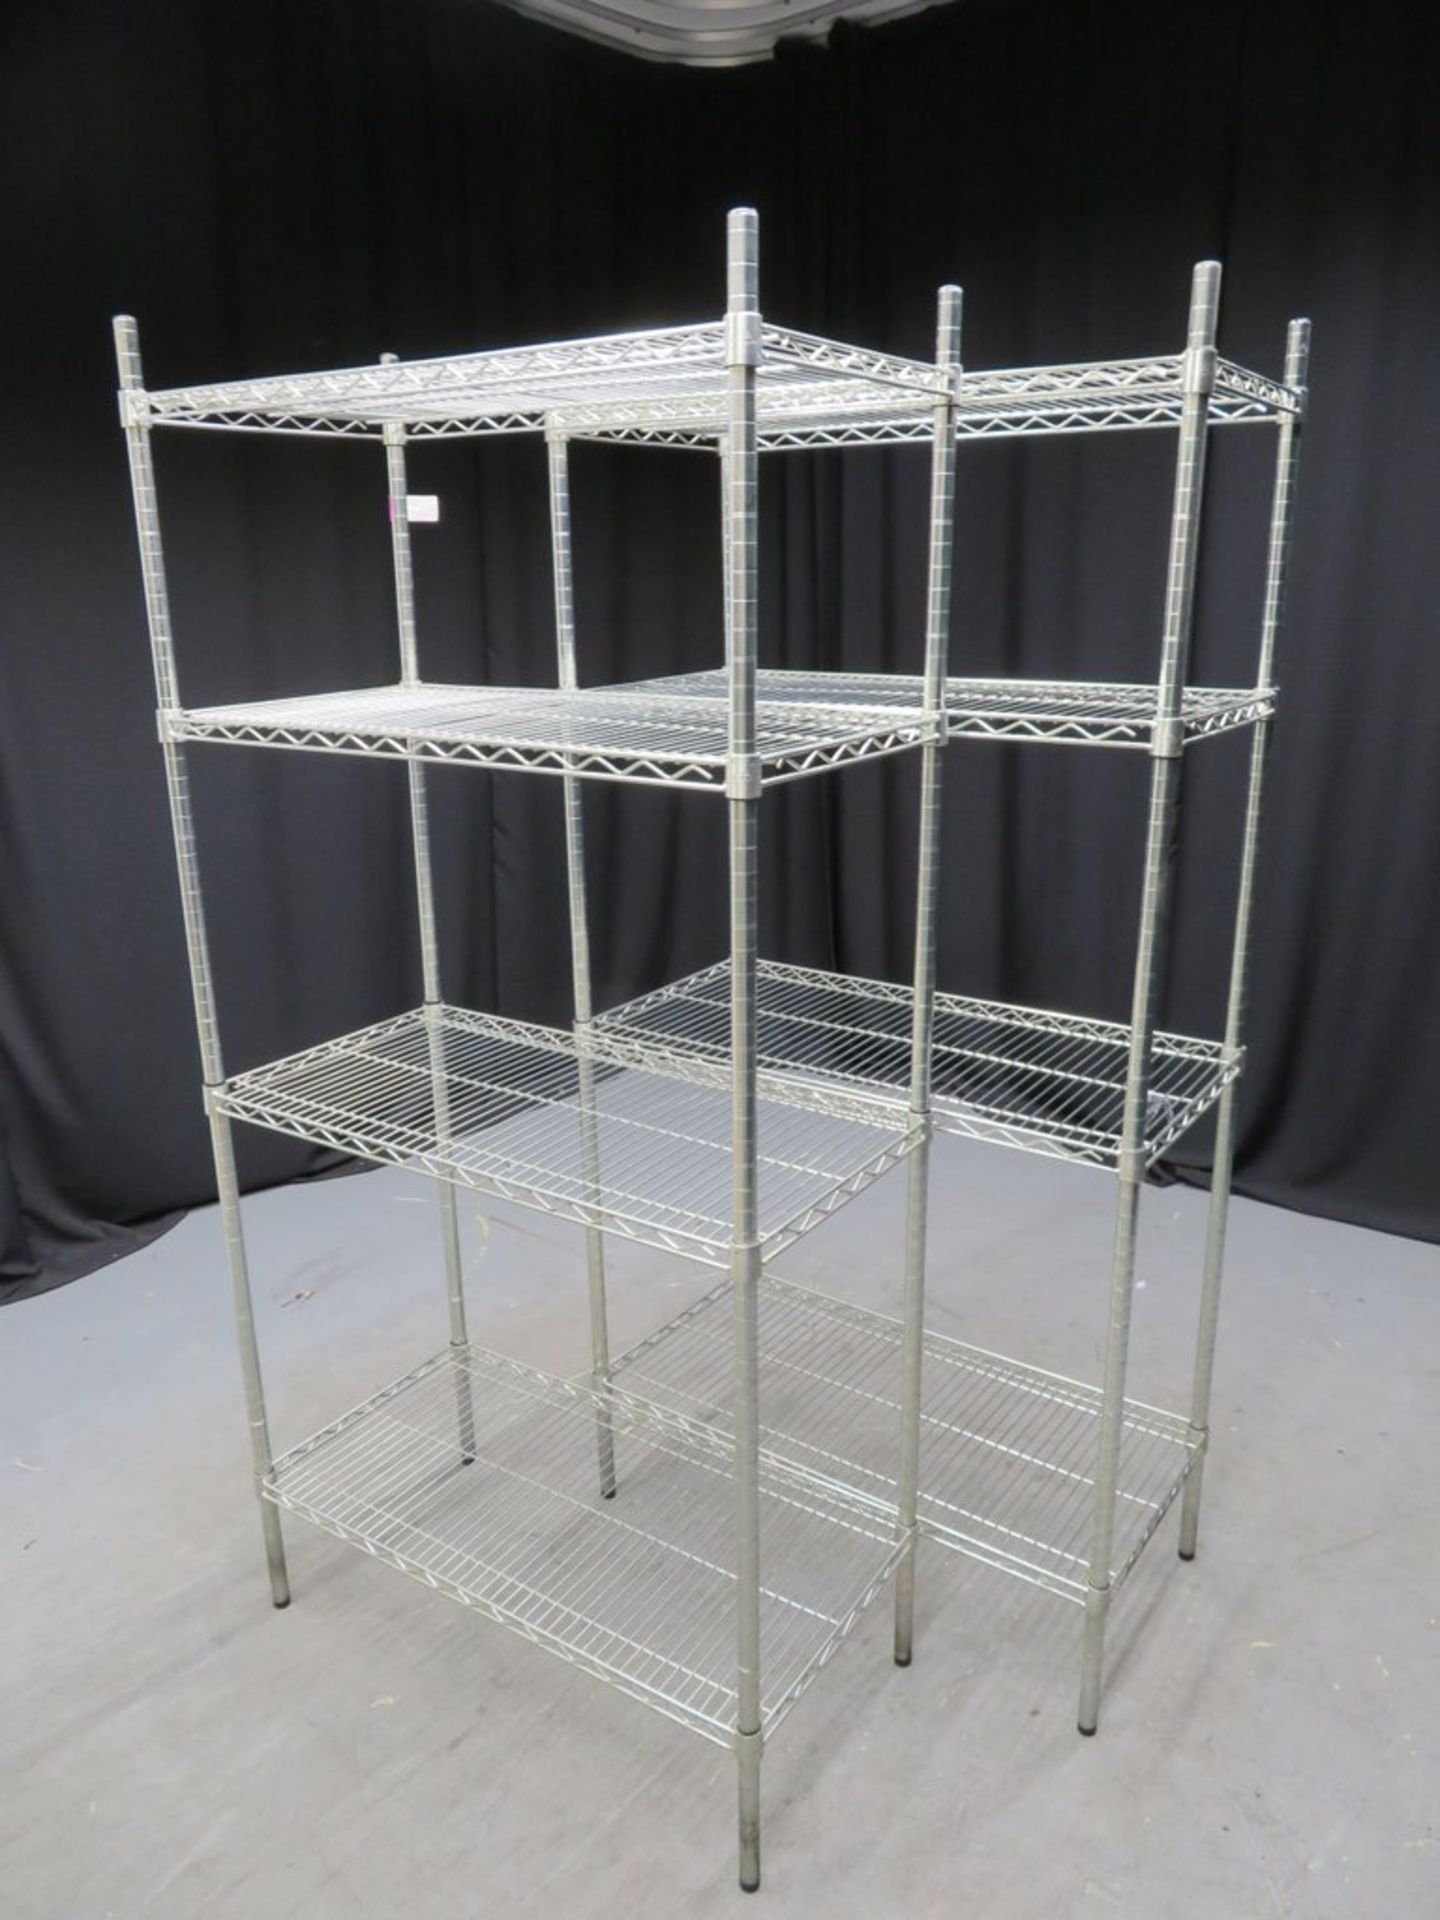 2 x Vogue stainless steel 4 tier shelving units 900mm W x 460mm D x 1860mm D